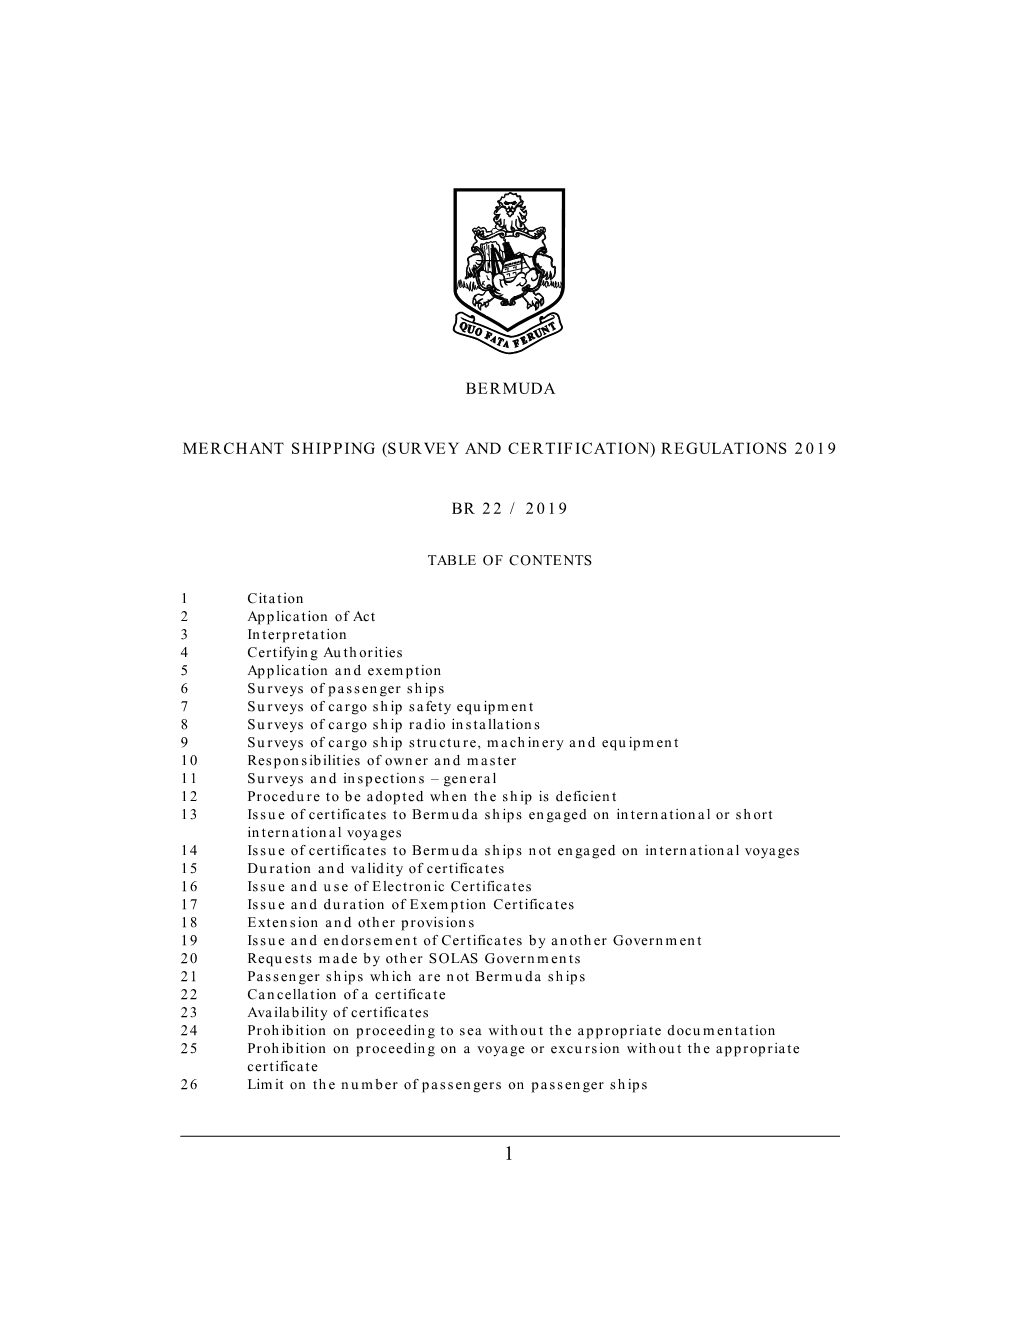 Merchant Shipping (Survey and Certification) Regulations 2019